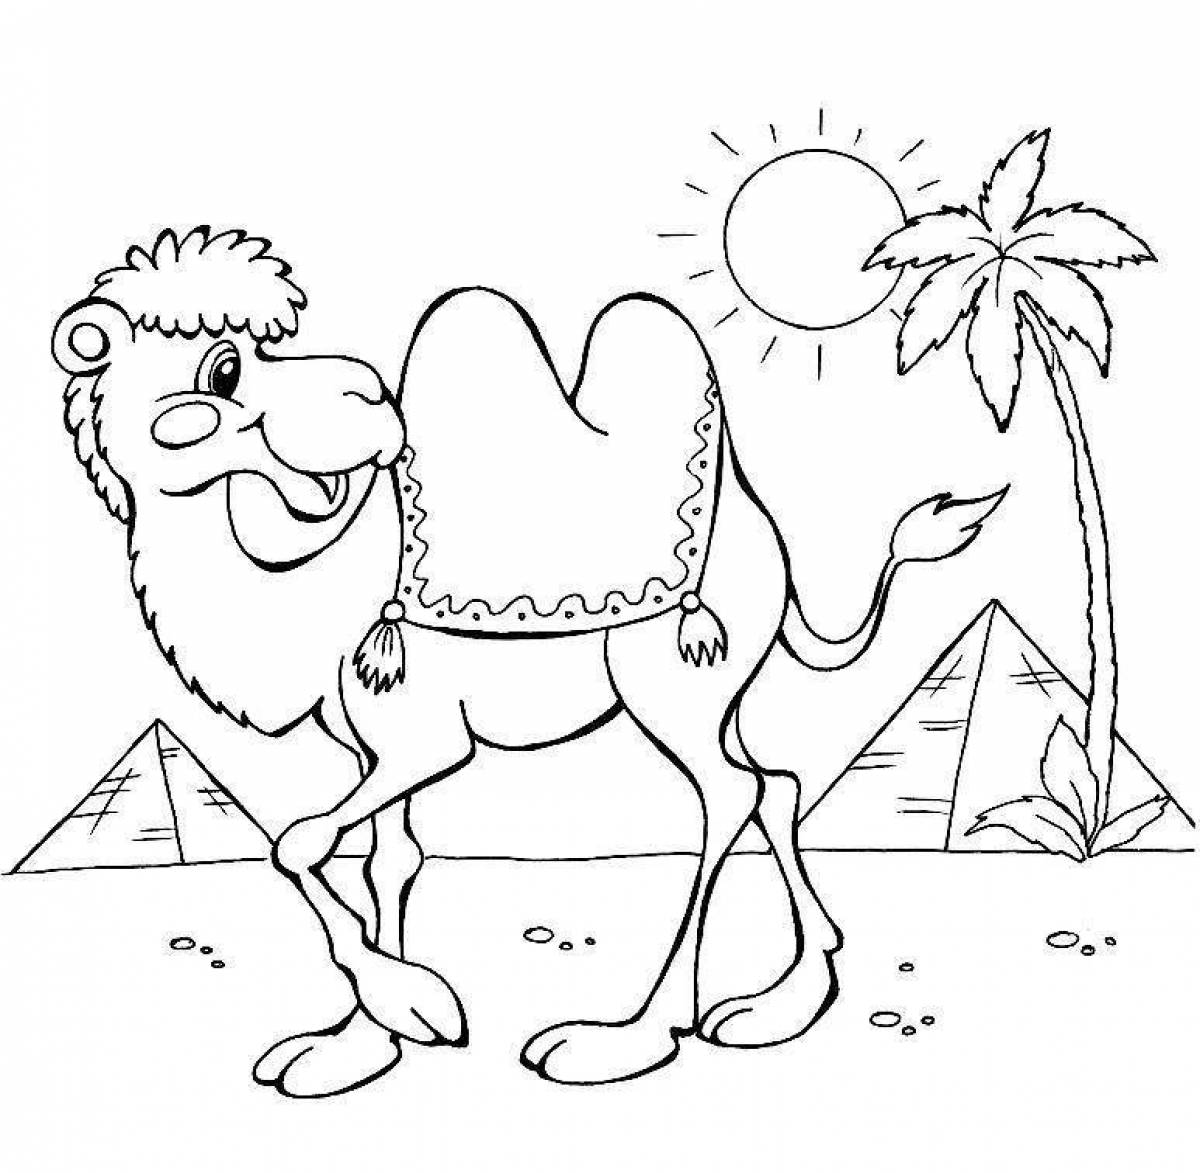 Live camel coloring book for kids